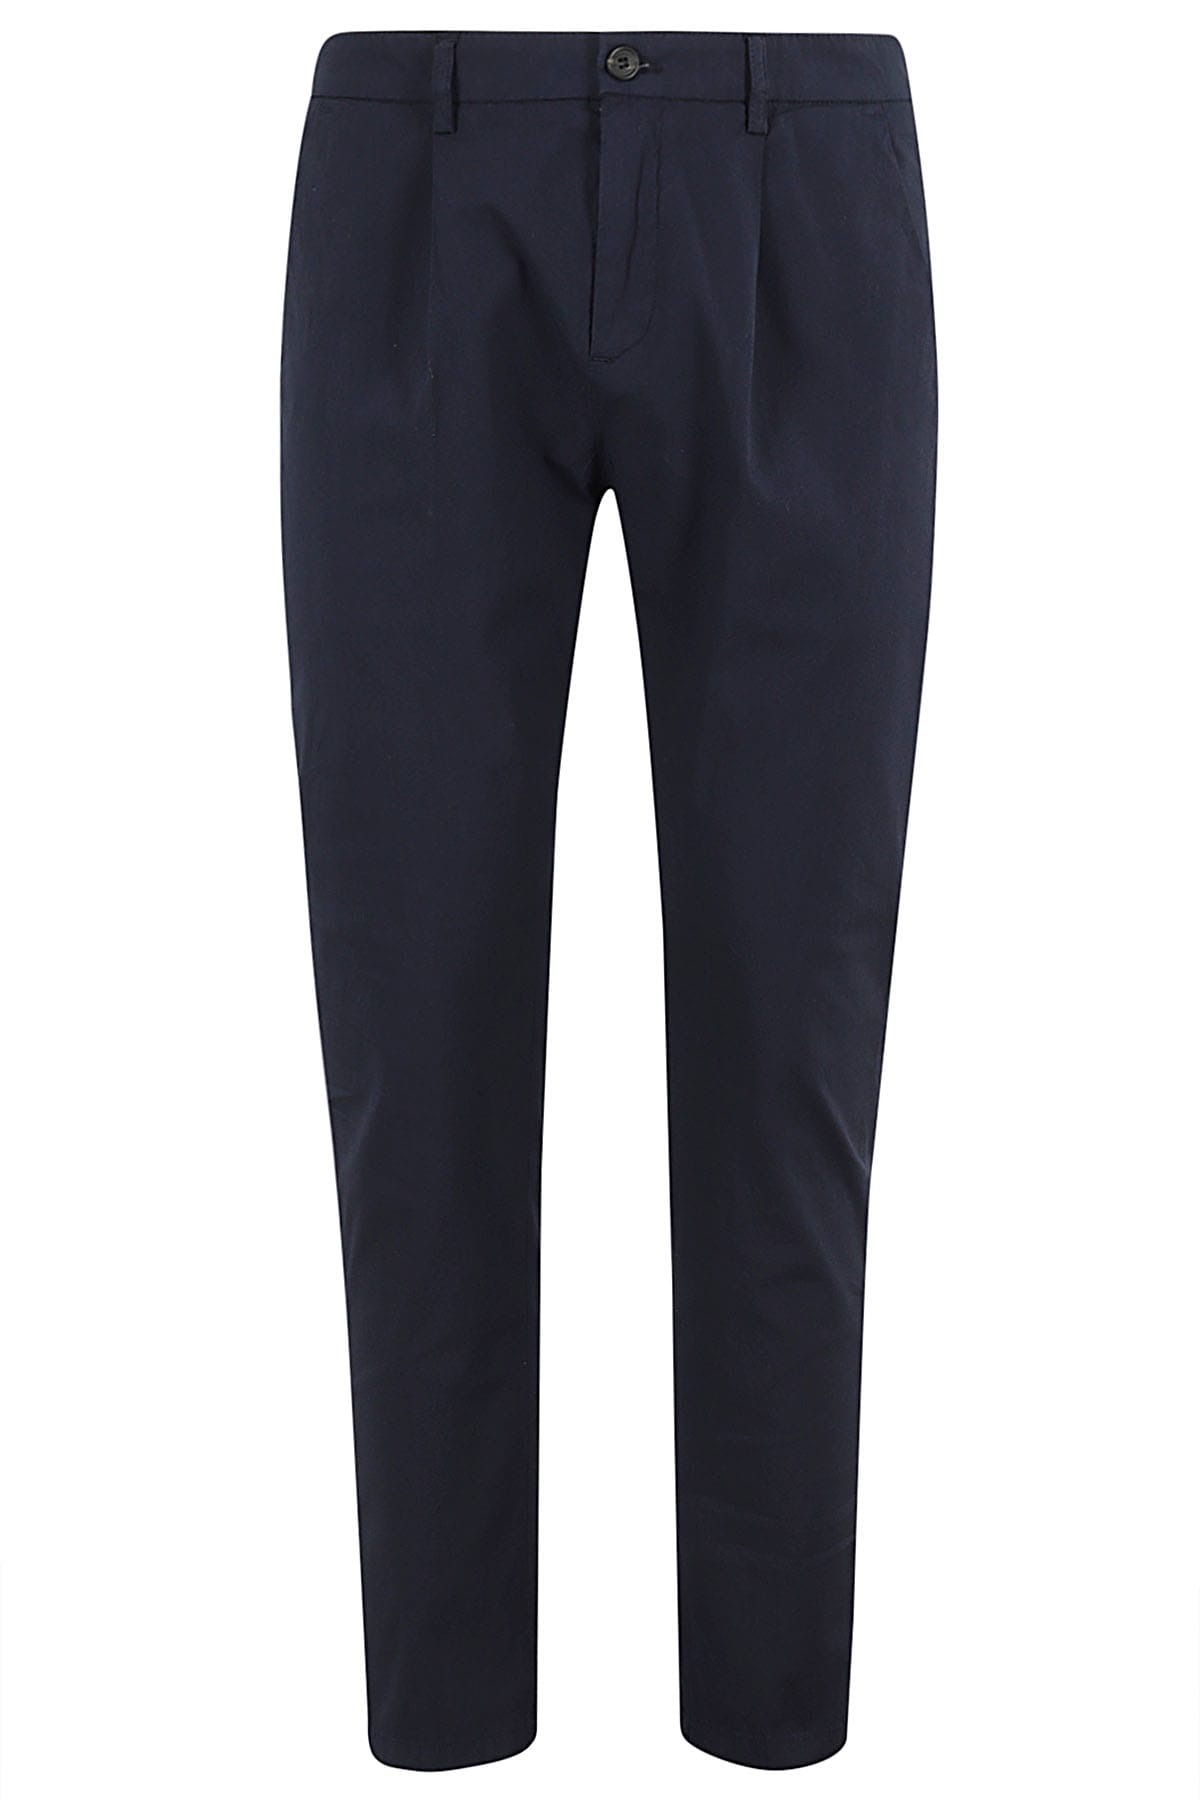 Shop Department Five Prince Pences In Navy